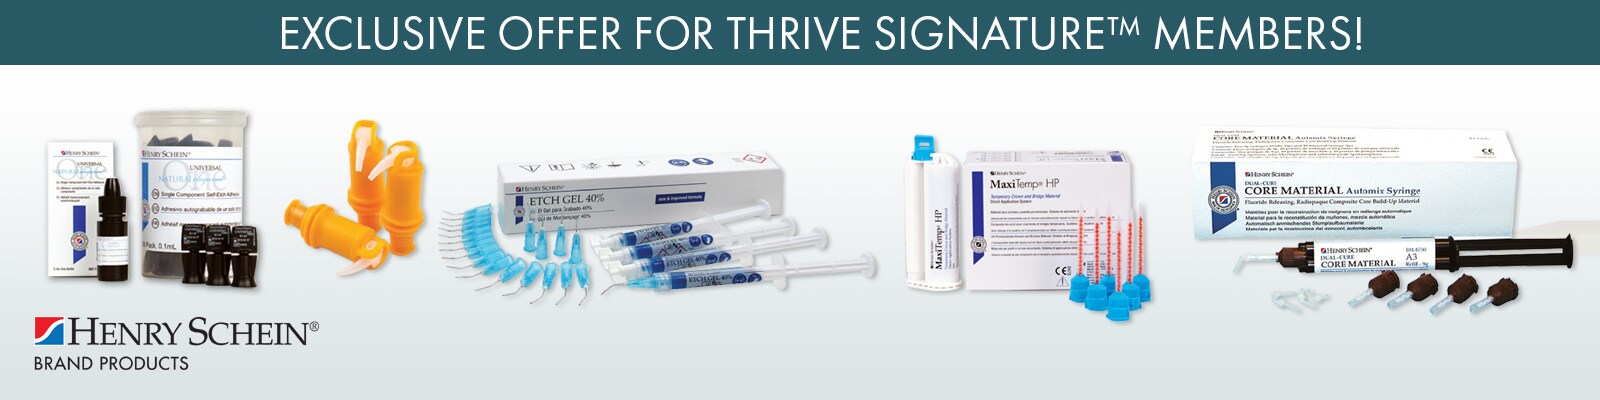 Exclusive Offer for Thrive Signature™ Members!